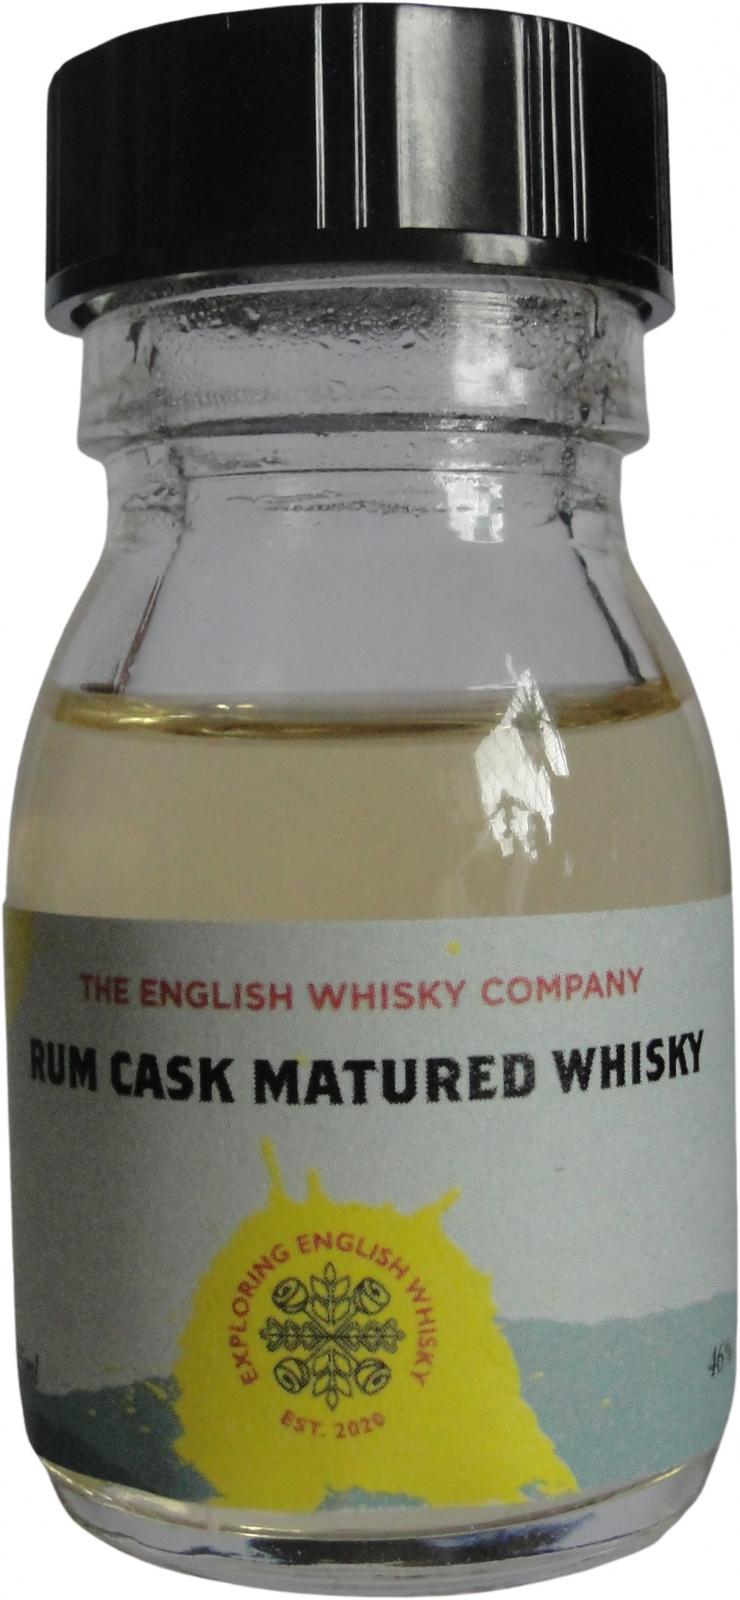 The English Whisky Rum Cask Matured Whisky TDT